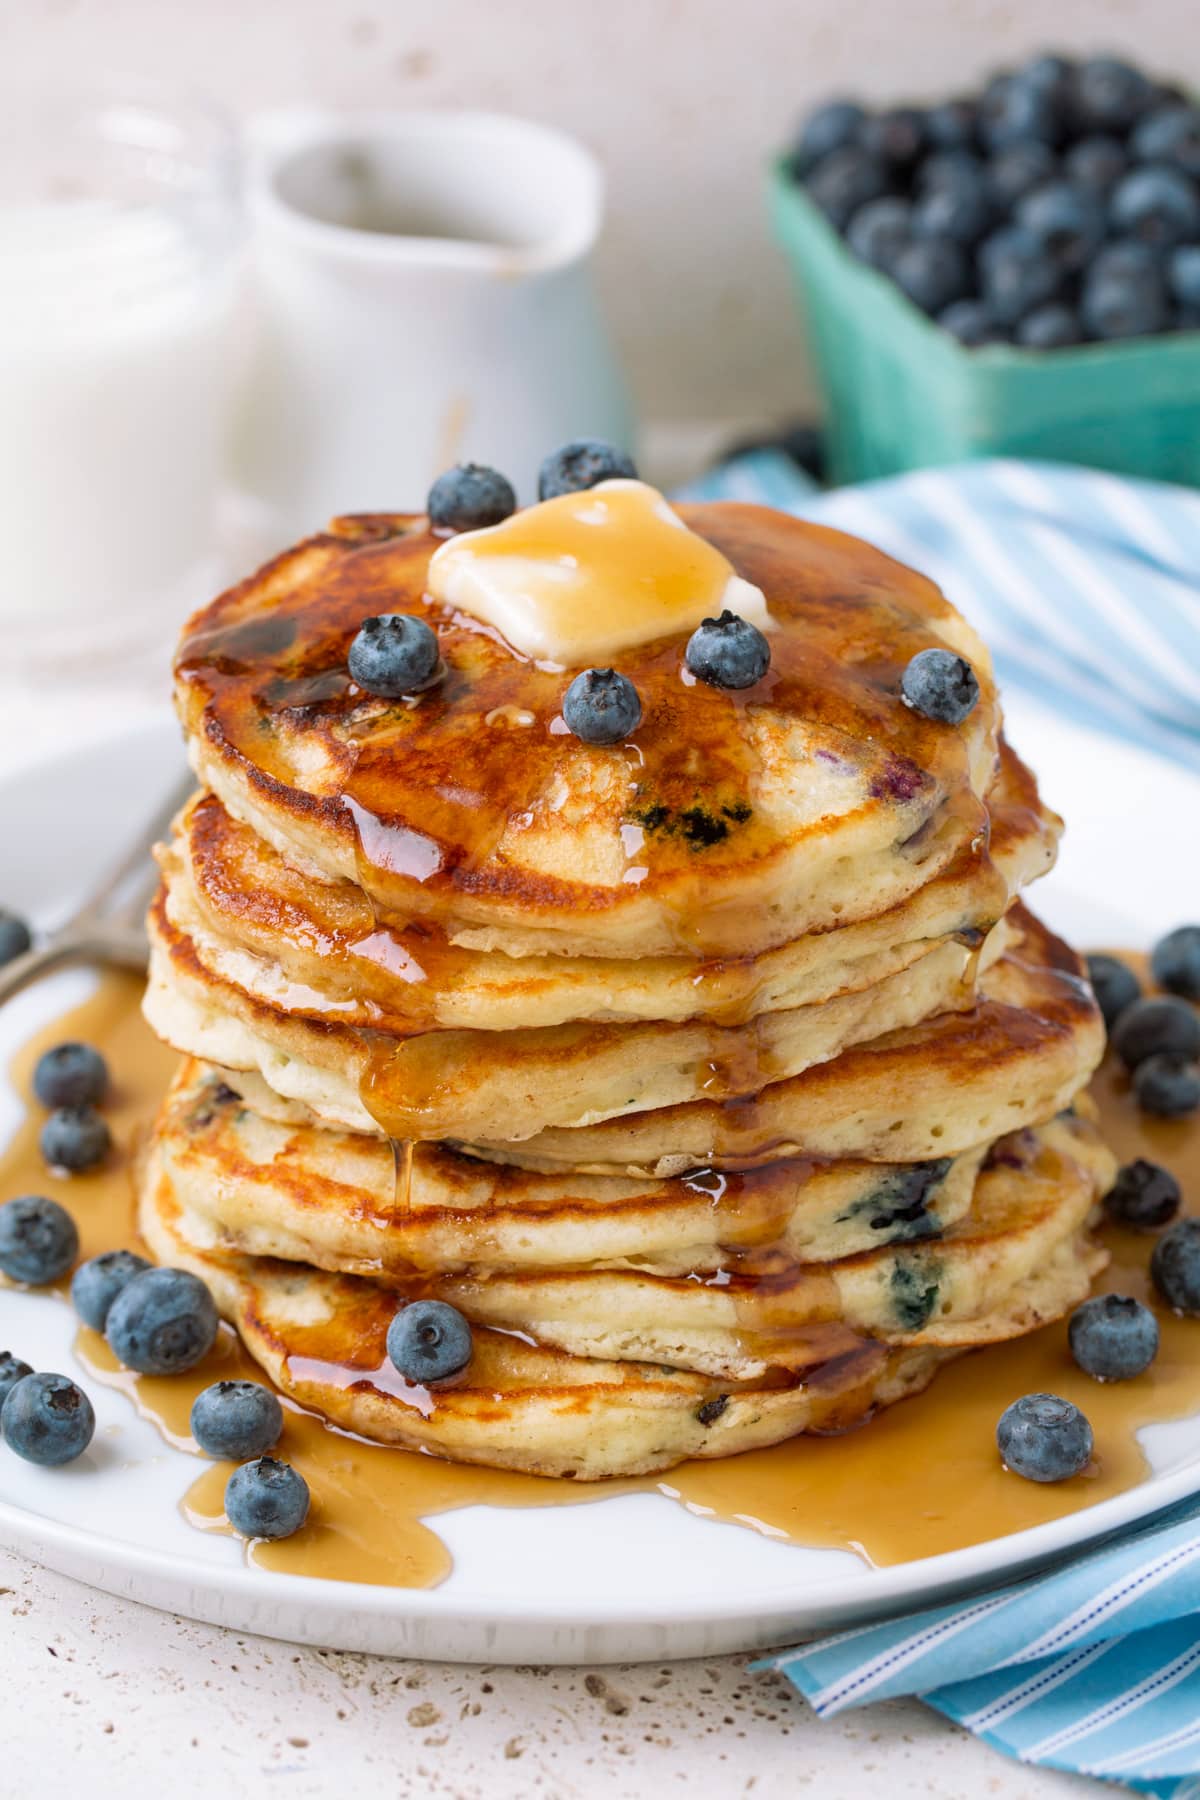 Fluffy Blueberry Pancakes (the Best!) - Cooking Classy